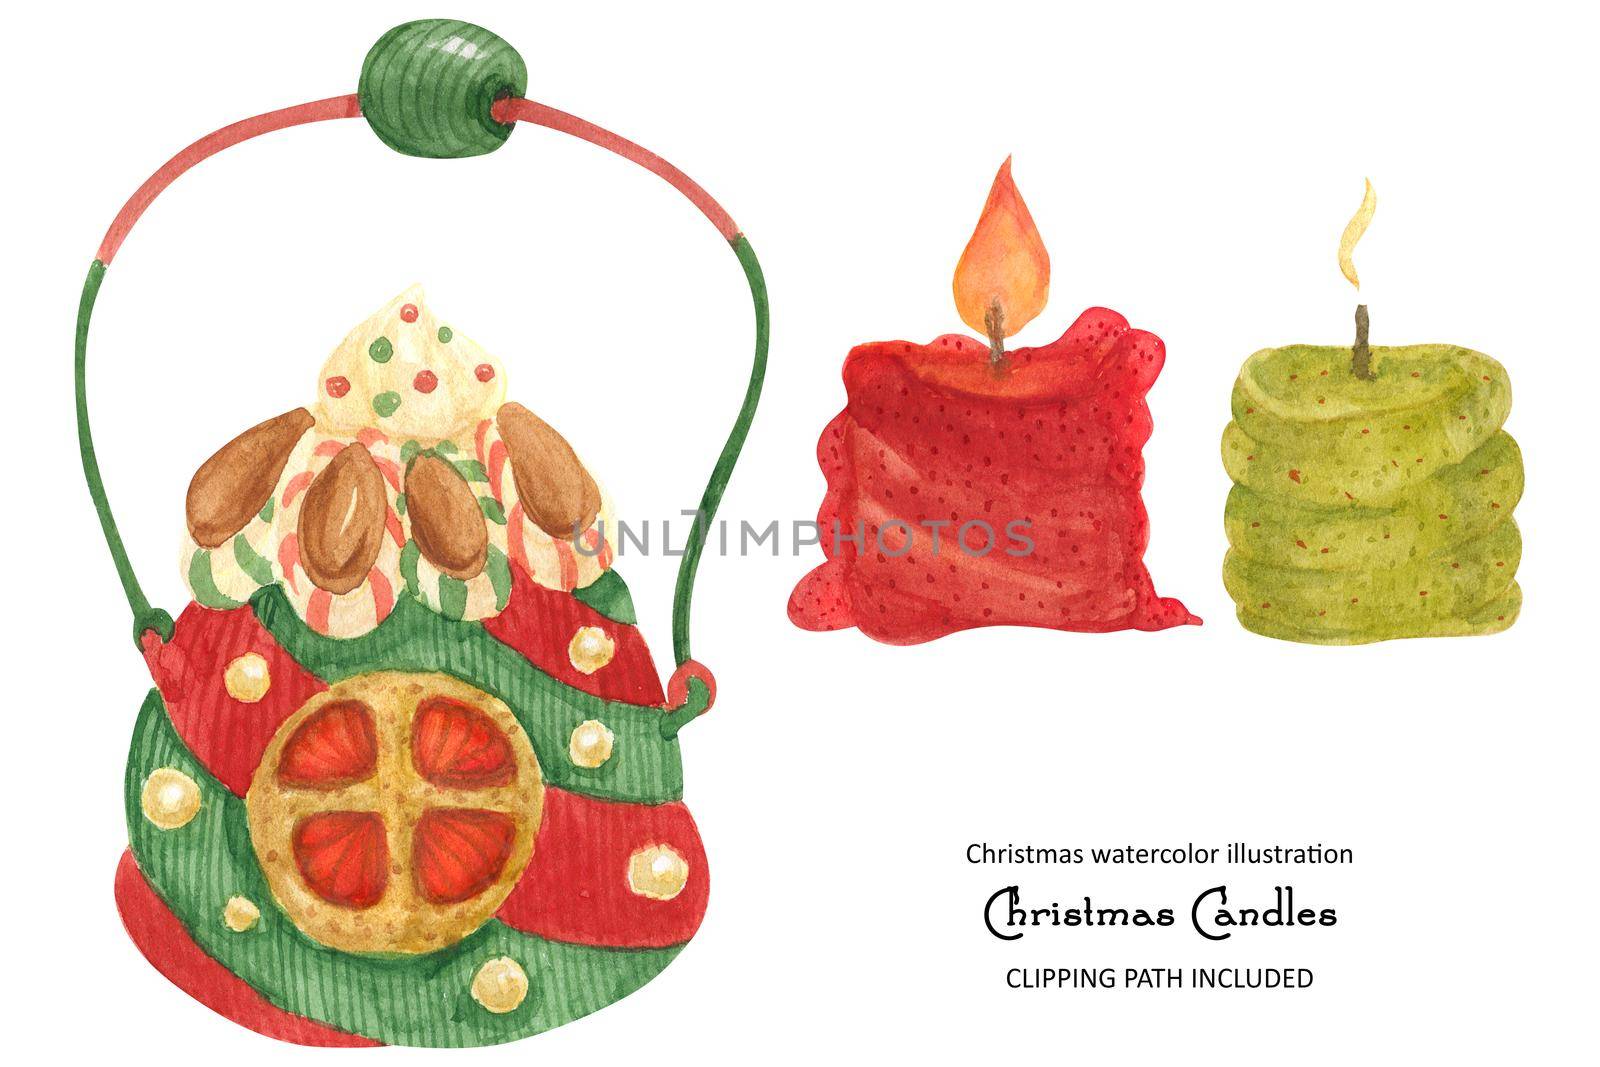 Christmas candles, watercolor illustration by Xeniasnowstorm